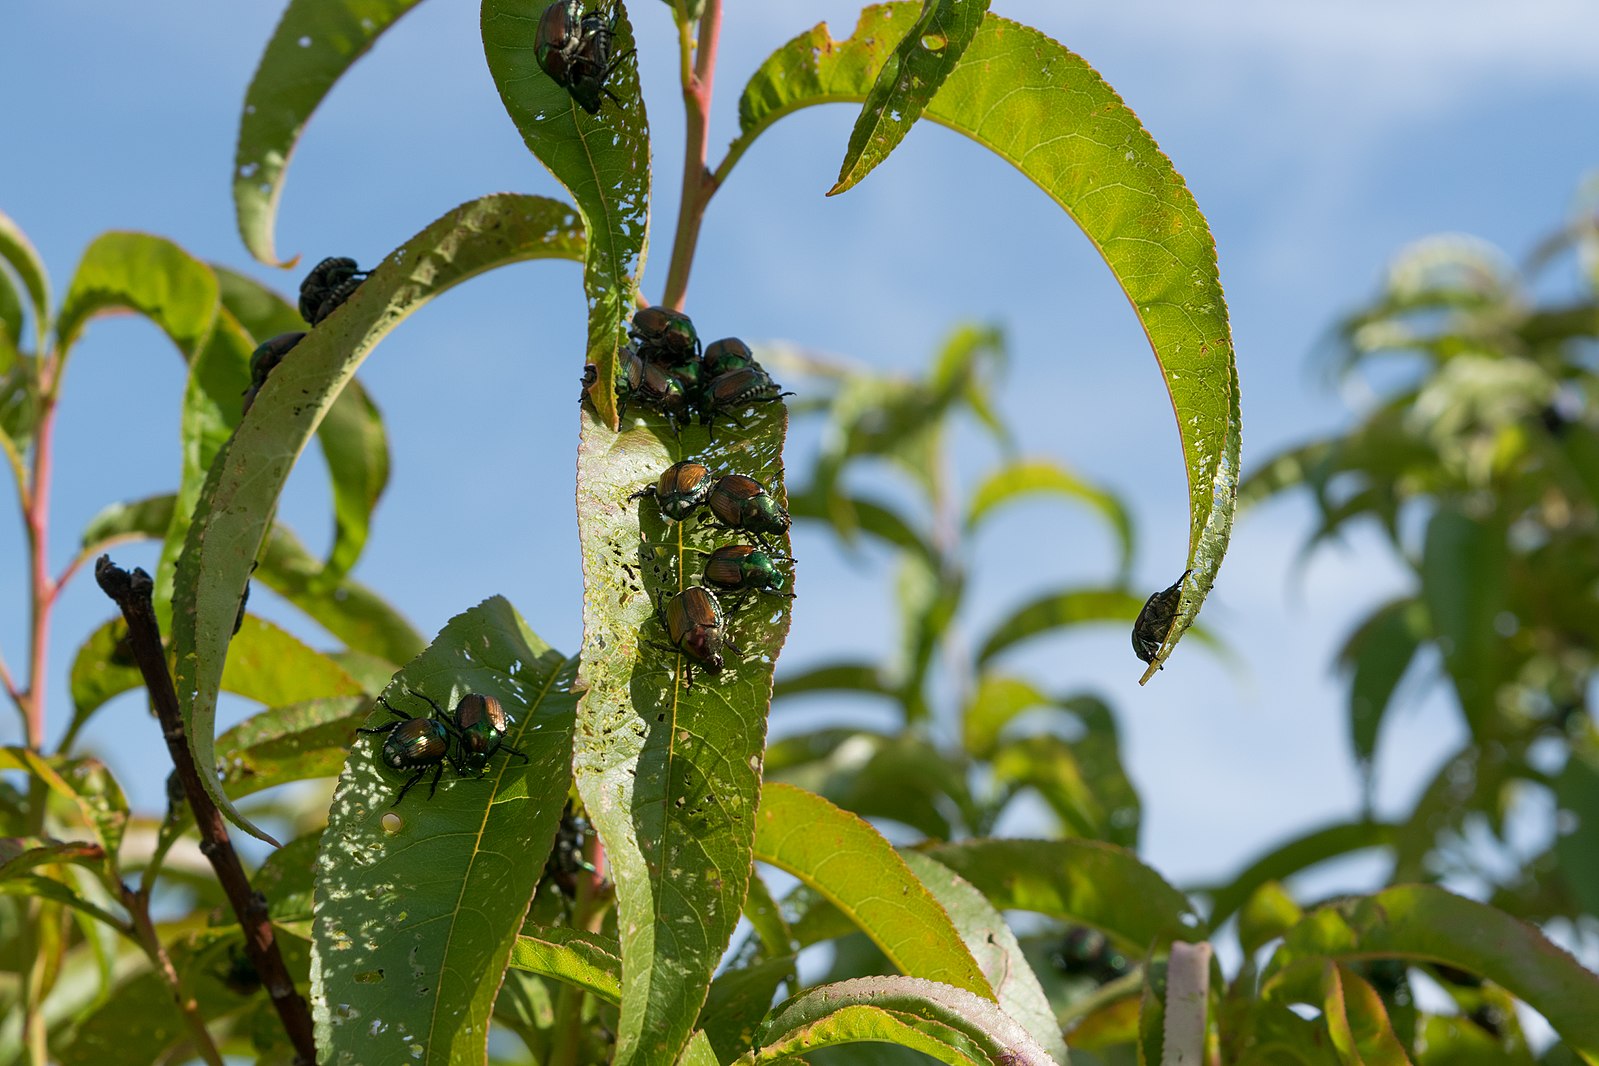 A group of Adult Japanese beetles feeding on a peach tree in Noblesville, Indiana